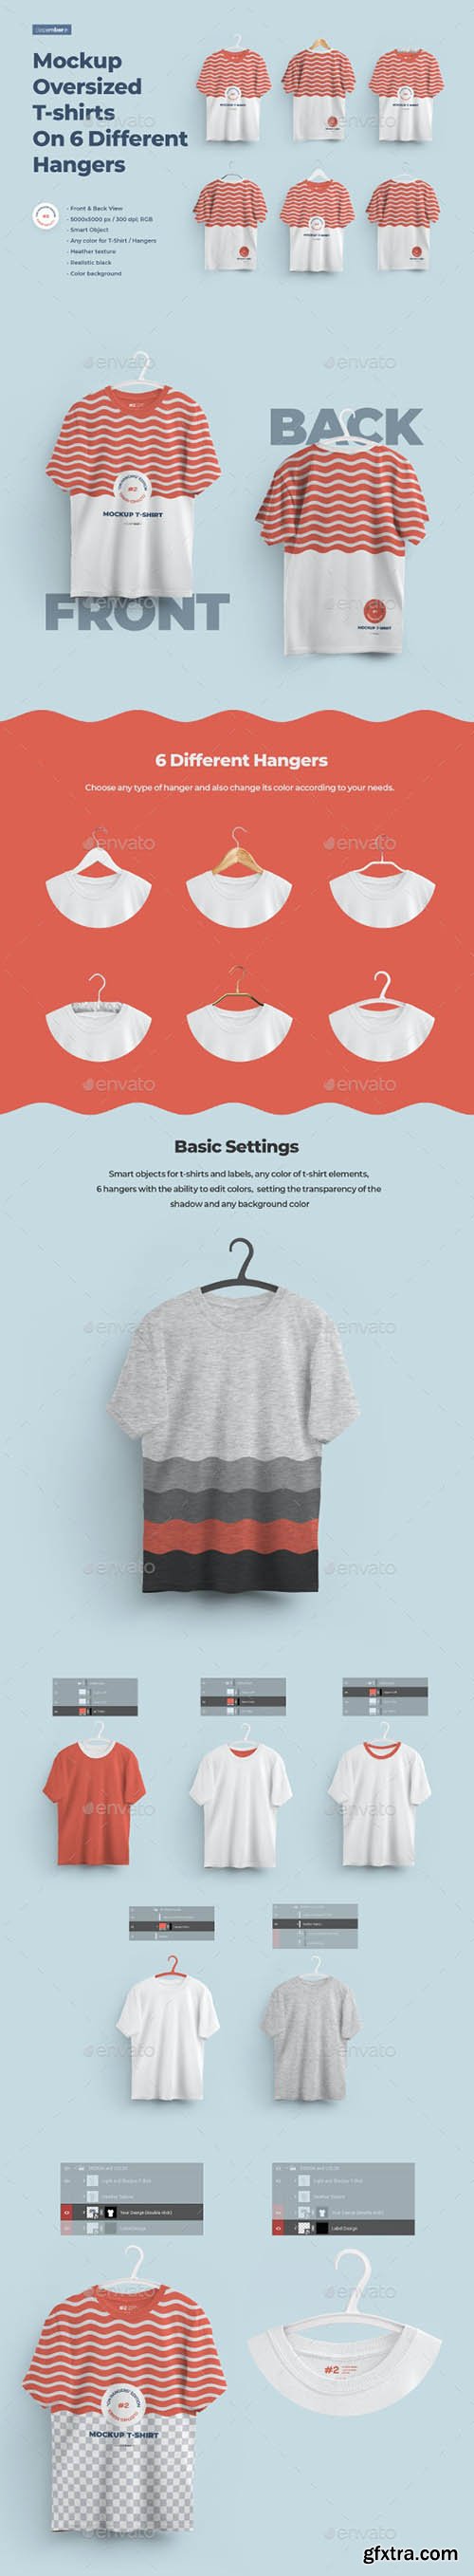 GraphicRiver - 2 Mockups Oversized T-shirts On 6 Different Hangers 27568335